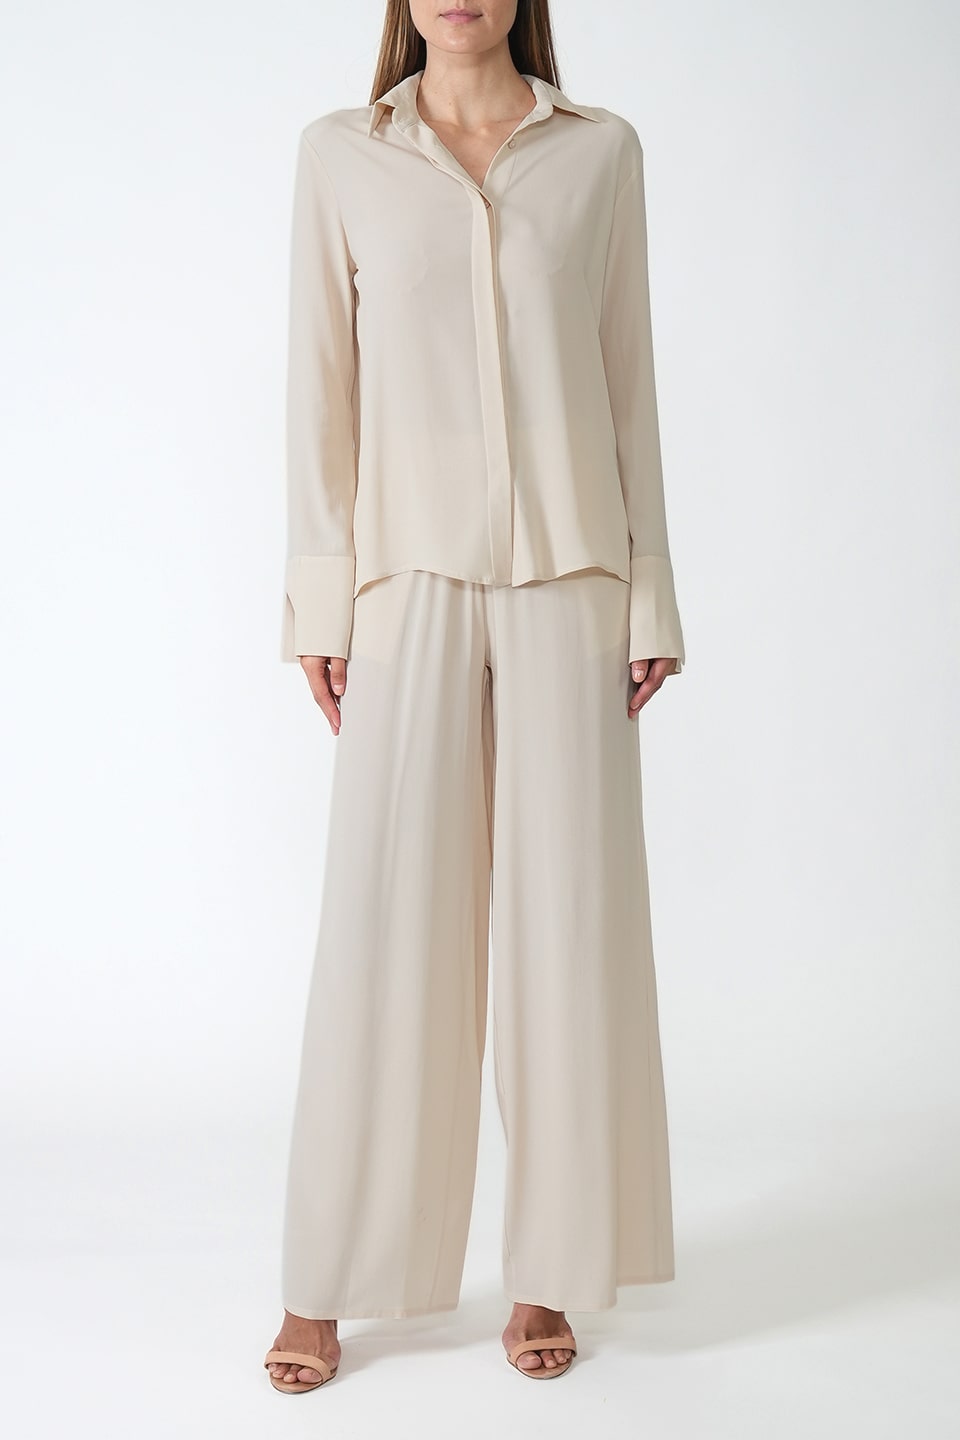 Shop online trendy Ivory Women long sleeve from Federica Tosi Fashion designer. Product gallery 1